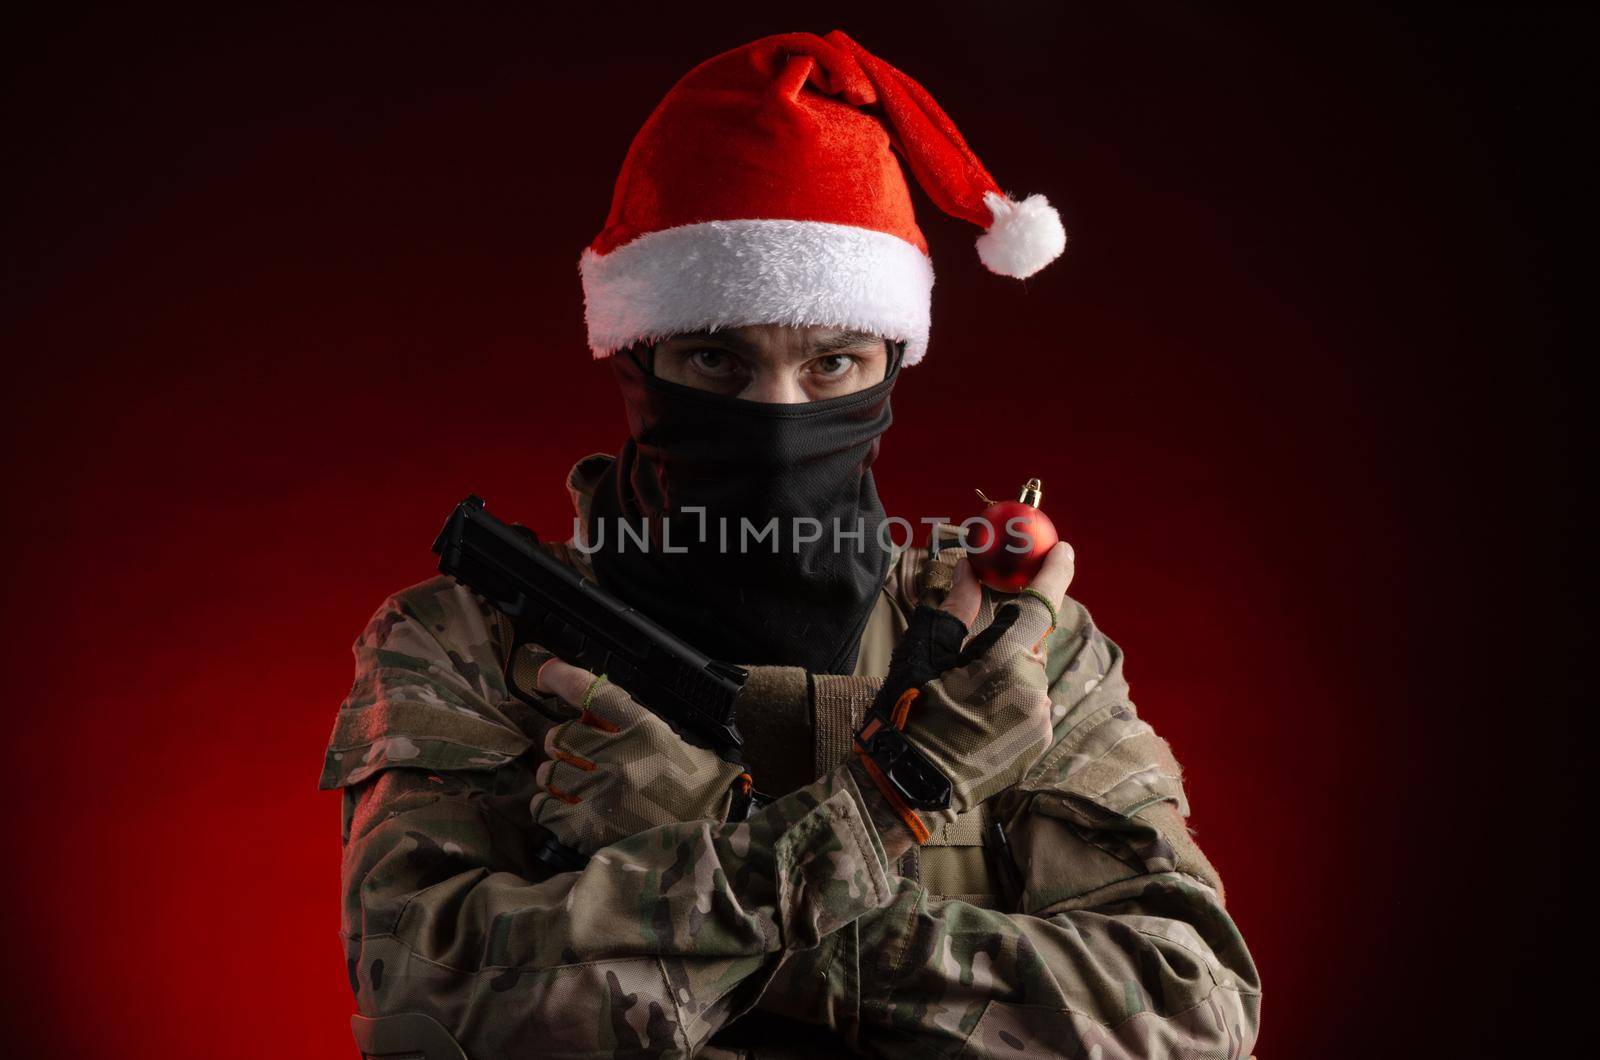 the man in a military uniform with a gun and a Santa Claus hat